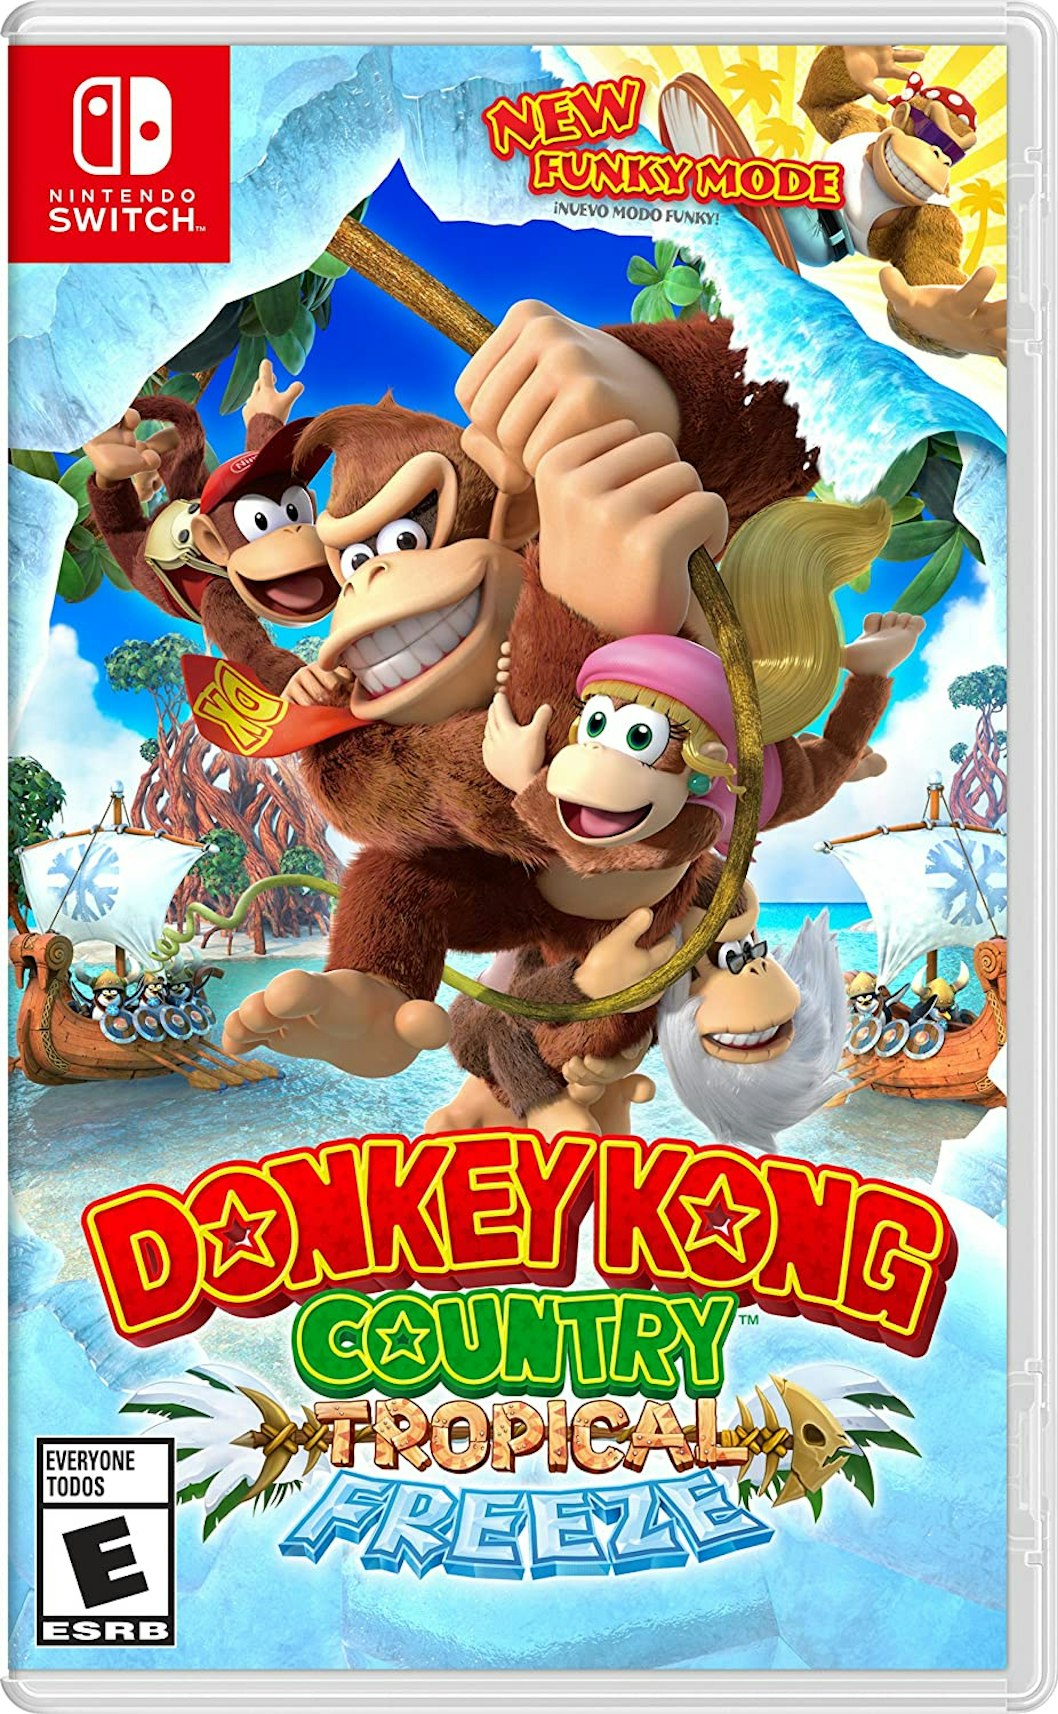 hval Manchuriet heroin Nintendo Switch Donkey Kong Country: Tropical Freeze Video Game - JP